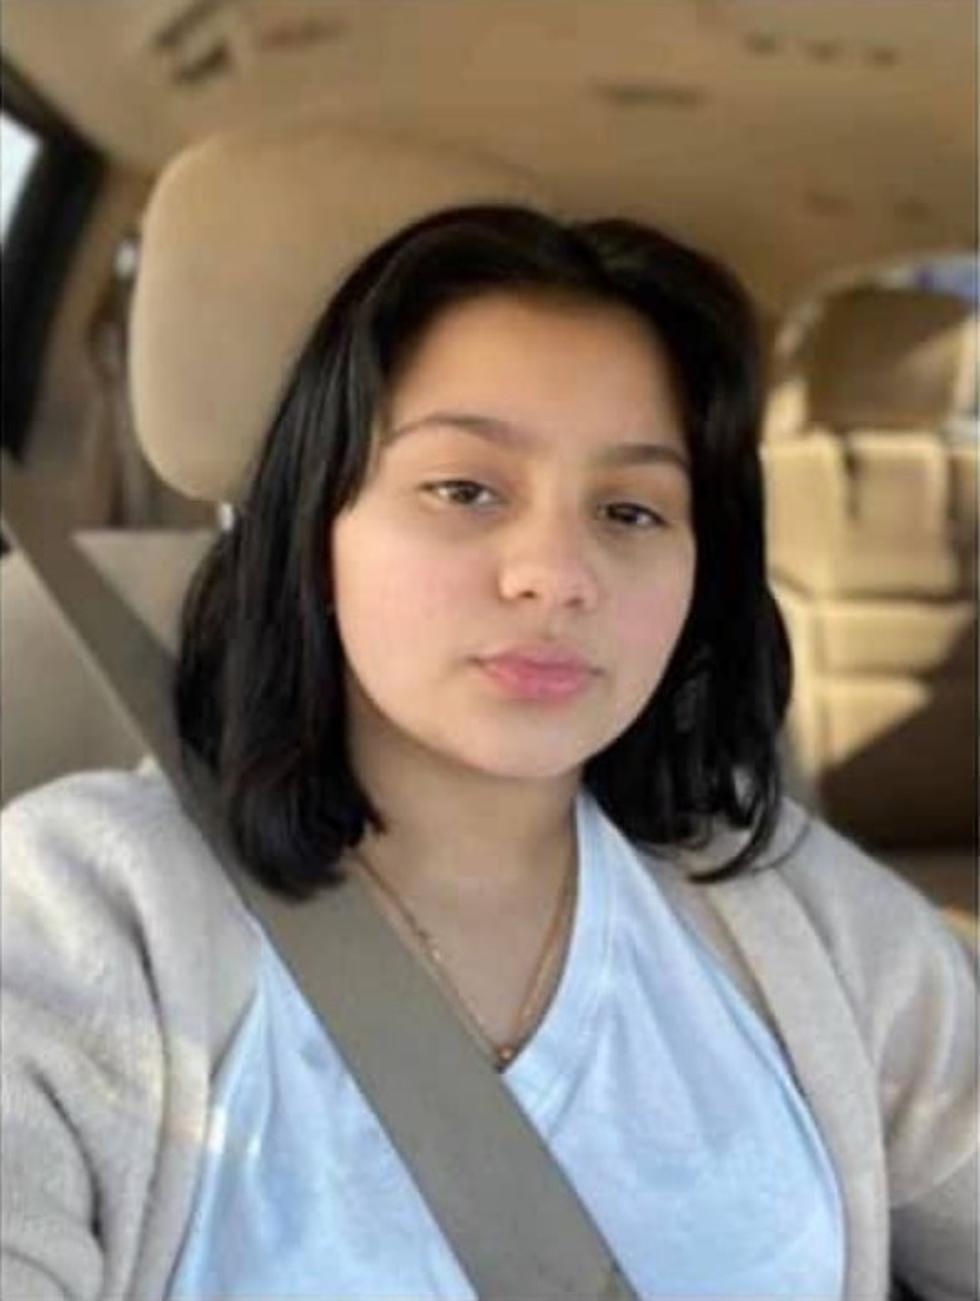 Have you seen her? Lakewood, NJ Police searching for missing 13-year old girl